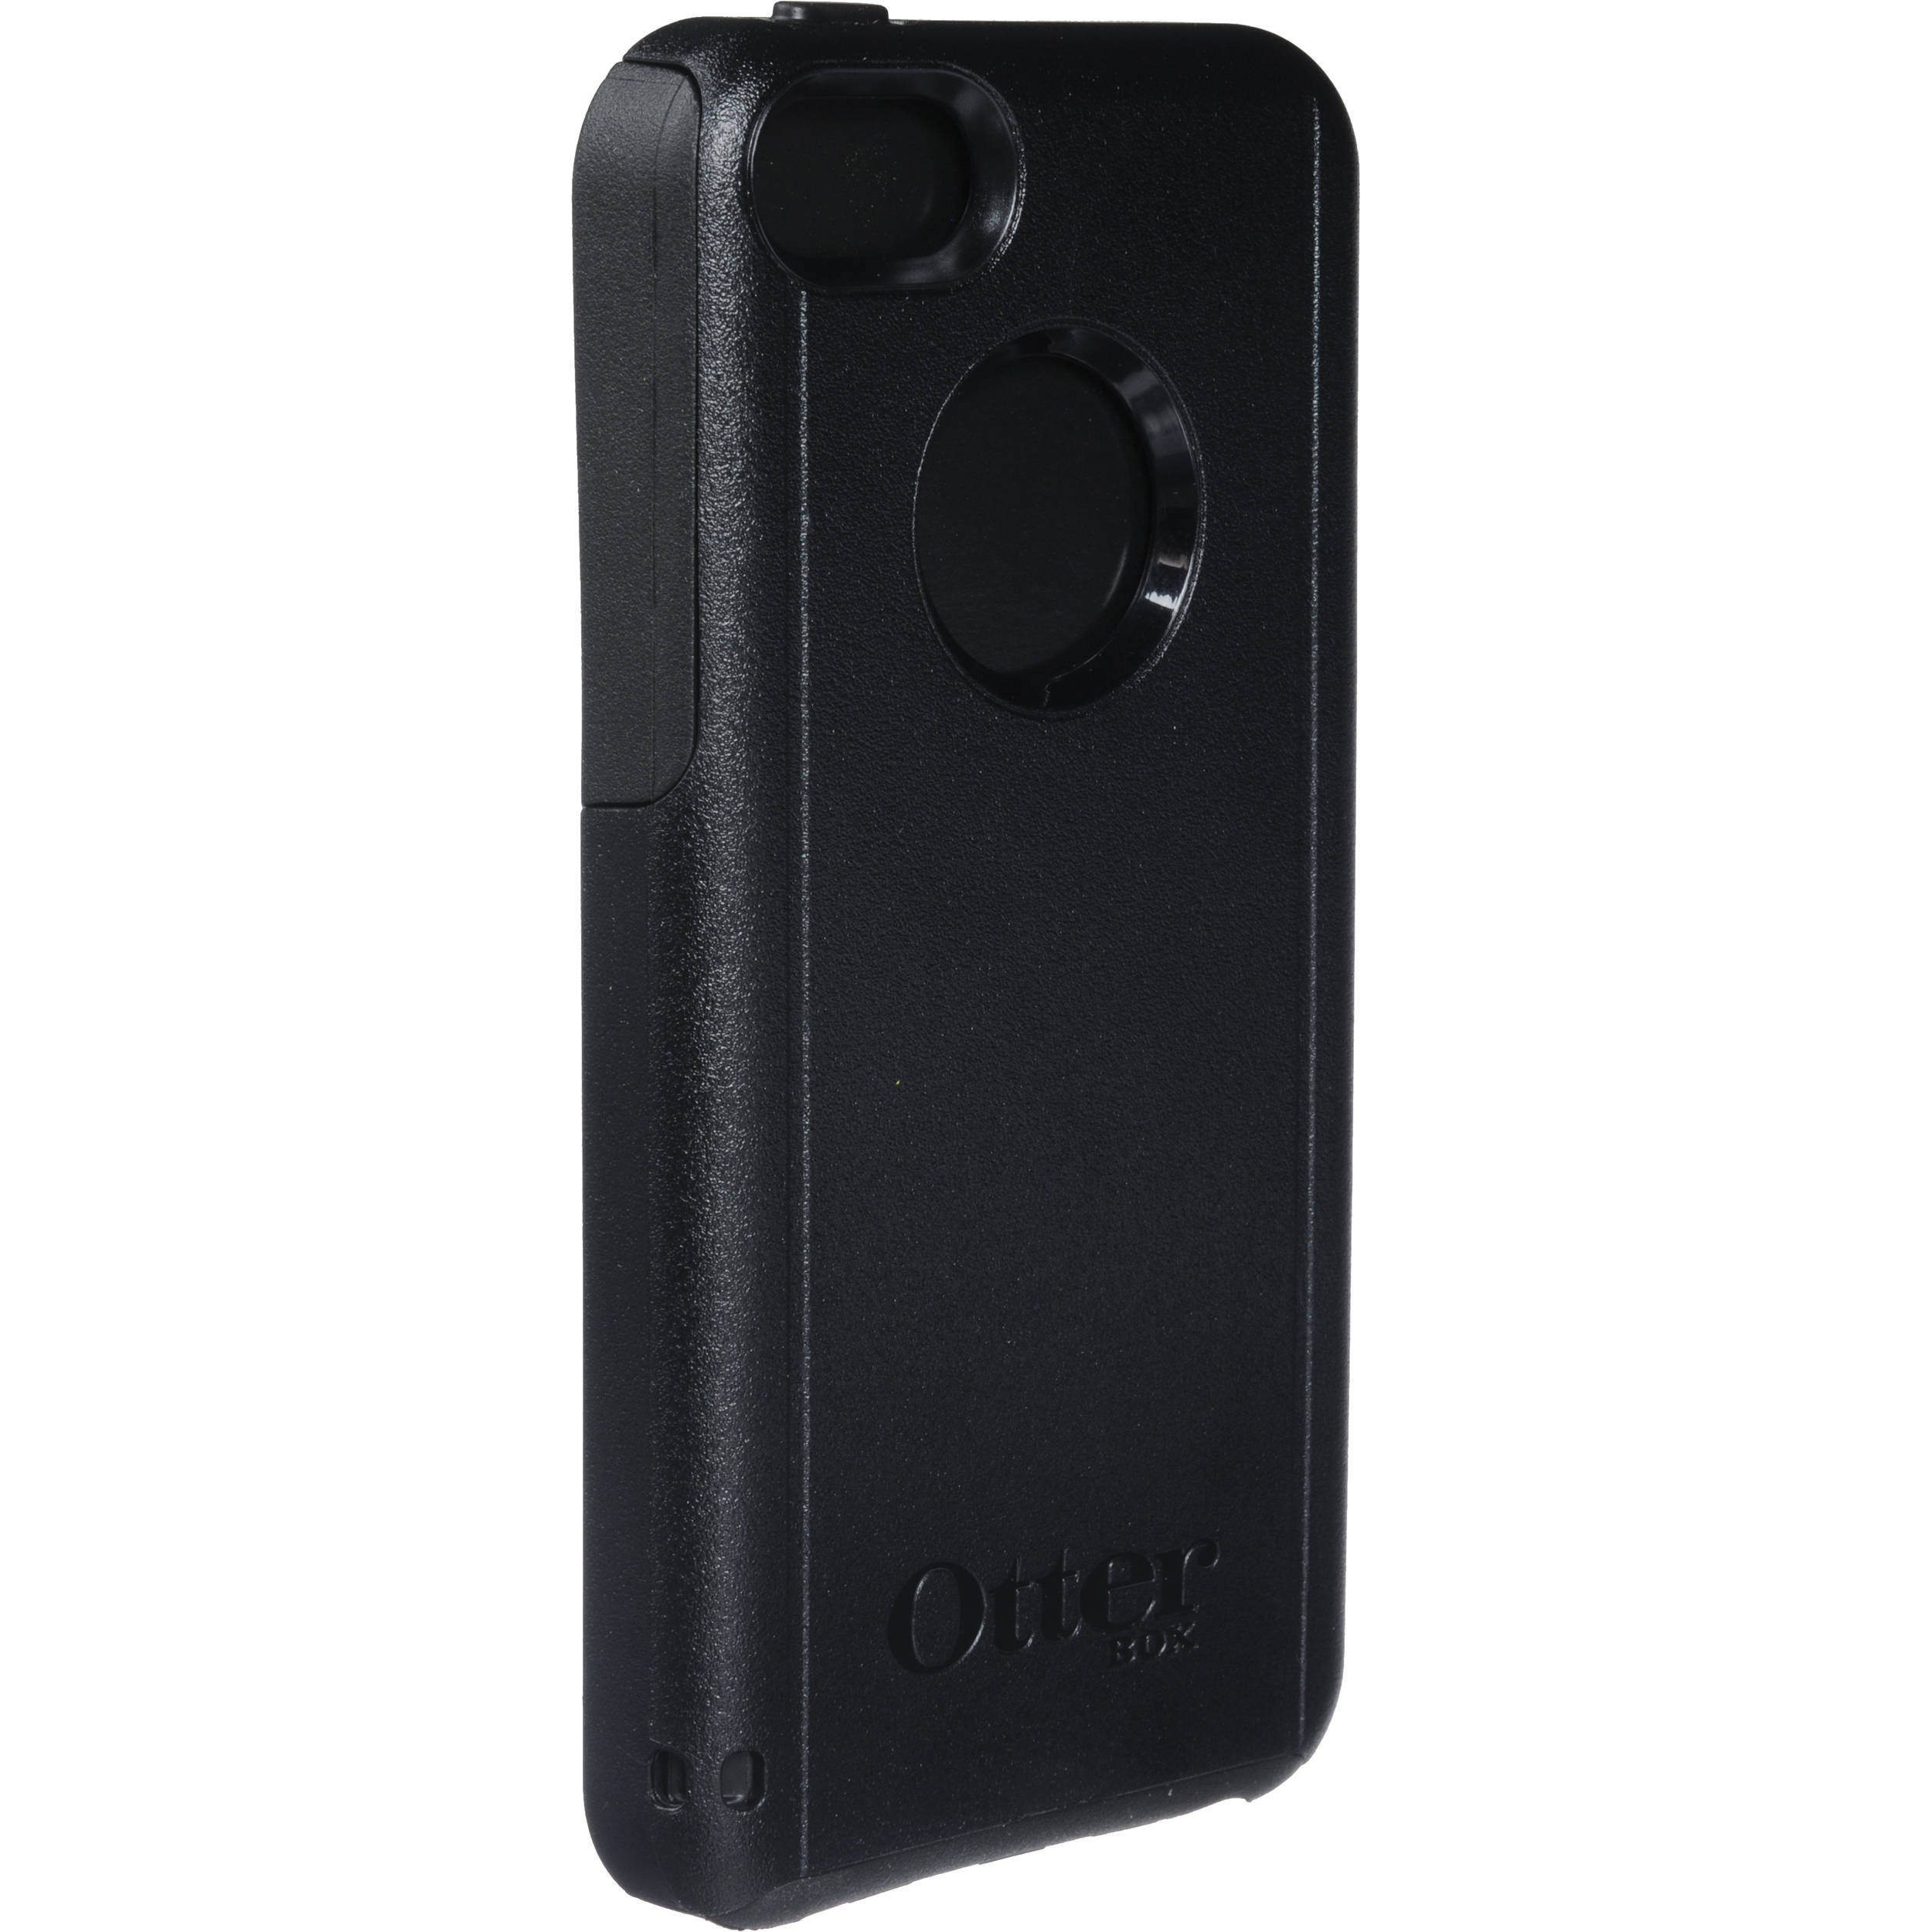 Otterbox Commuter Case Series for iPhone 5c, Black - image 1 of 6